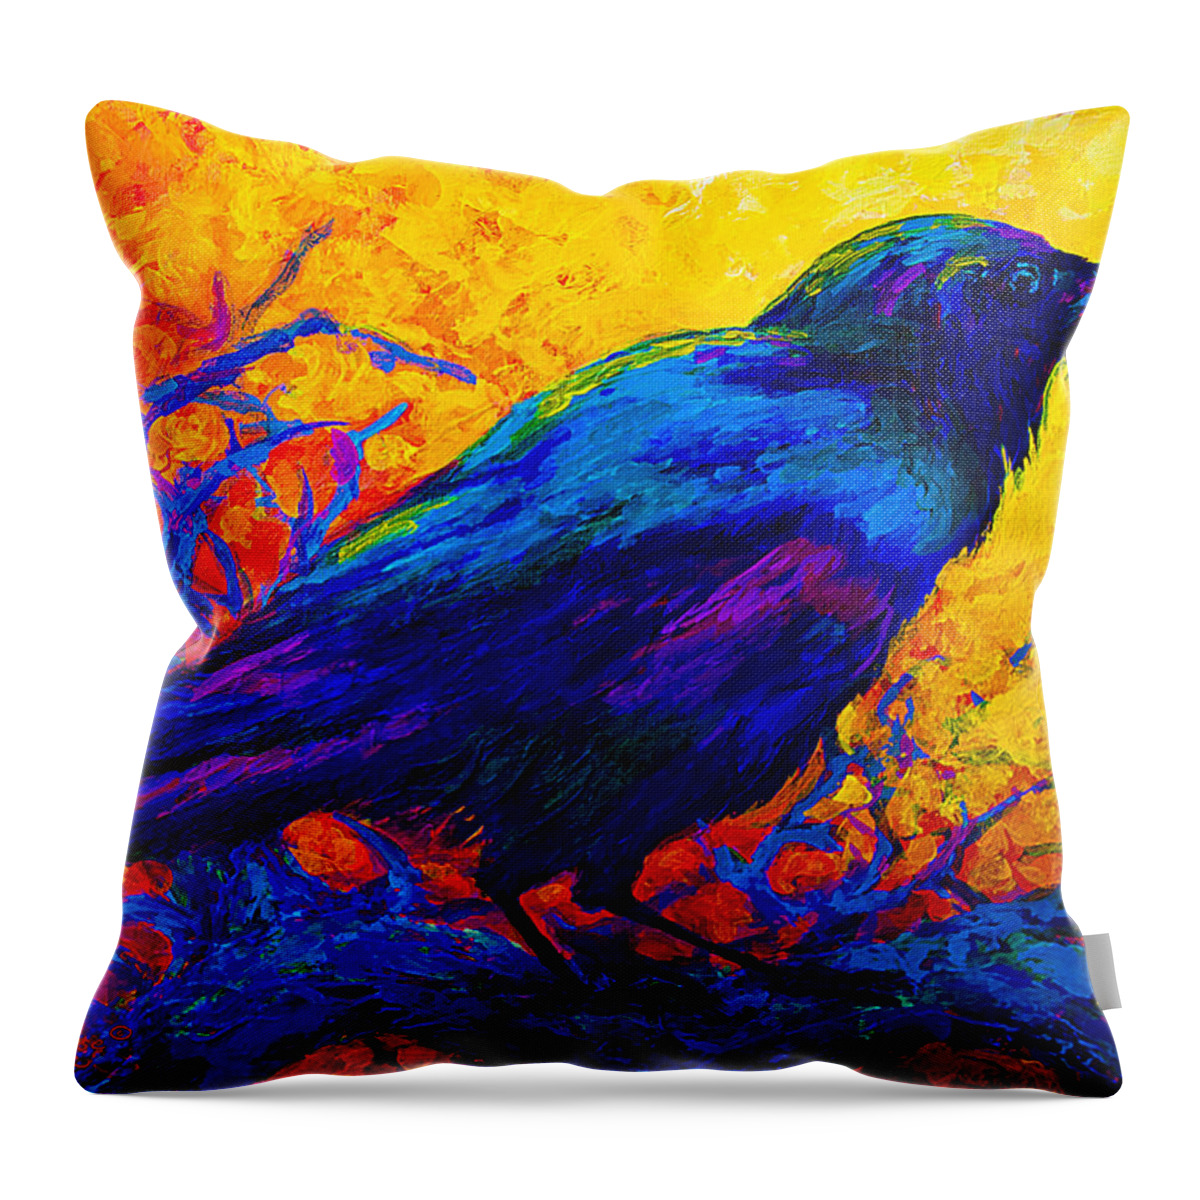 Crows Throw Pillow featuring the painting Black Onyx - Raven by Marion Rose